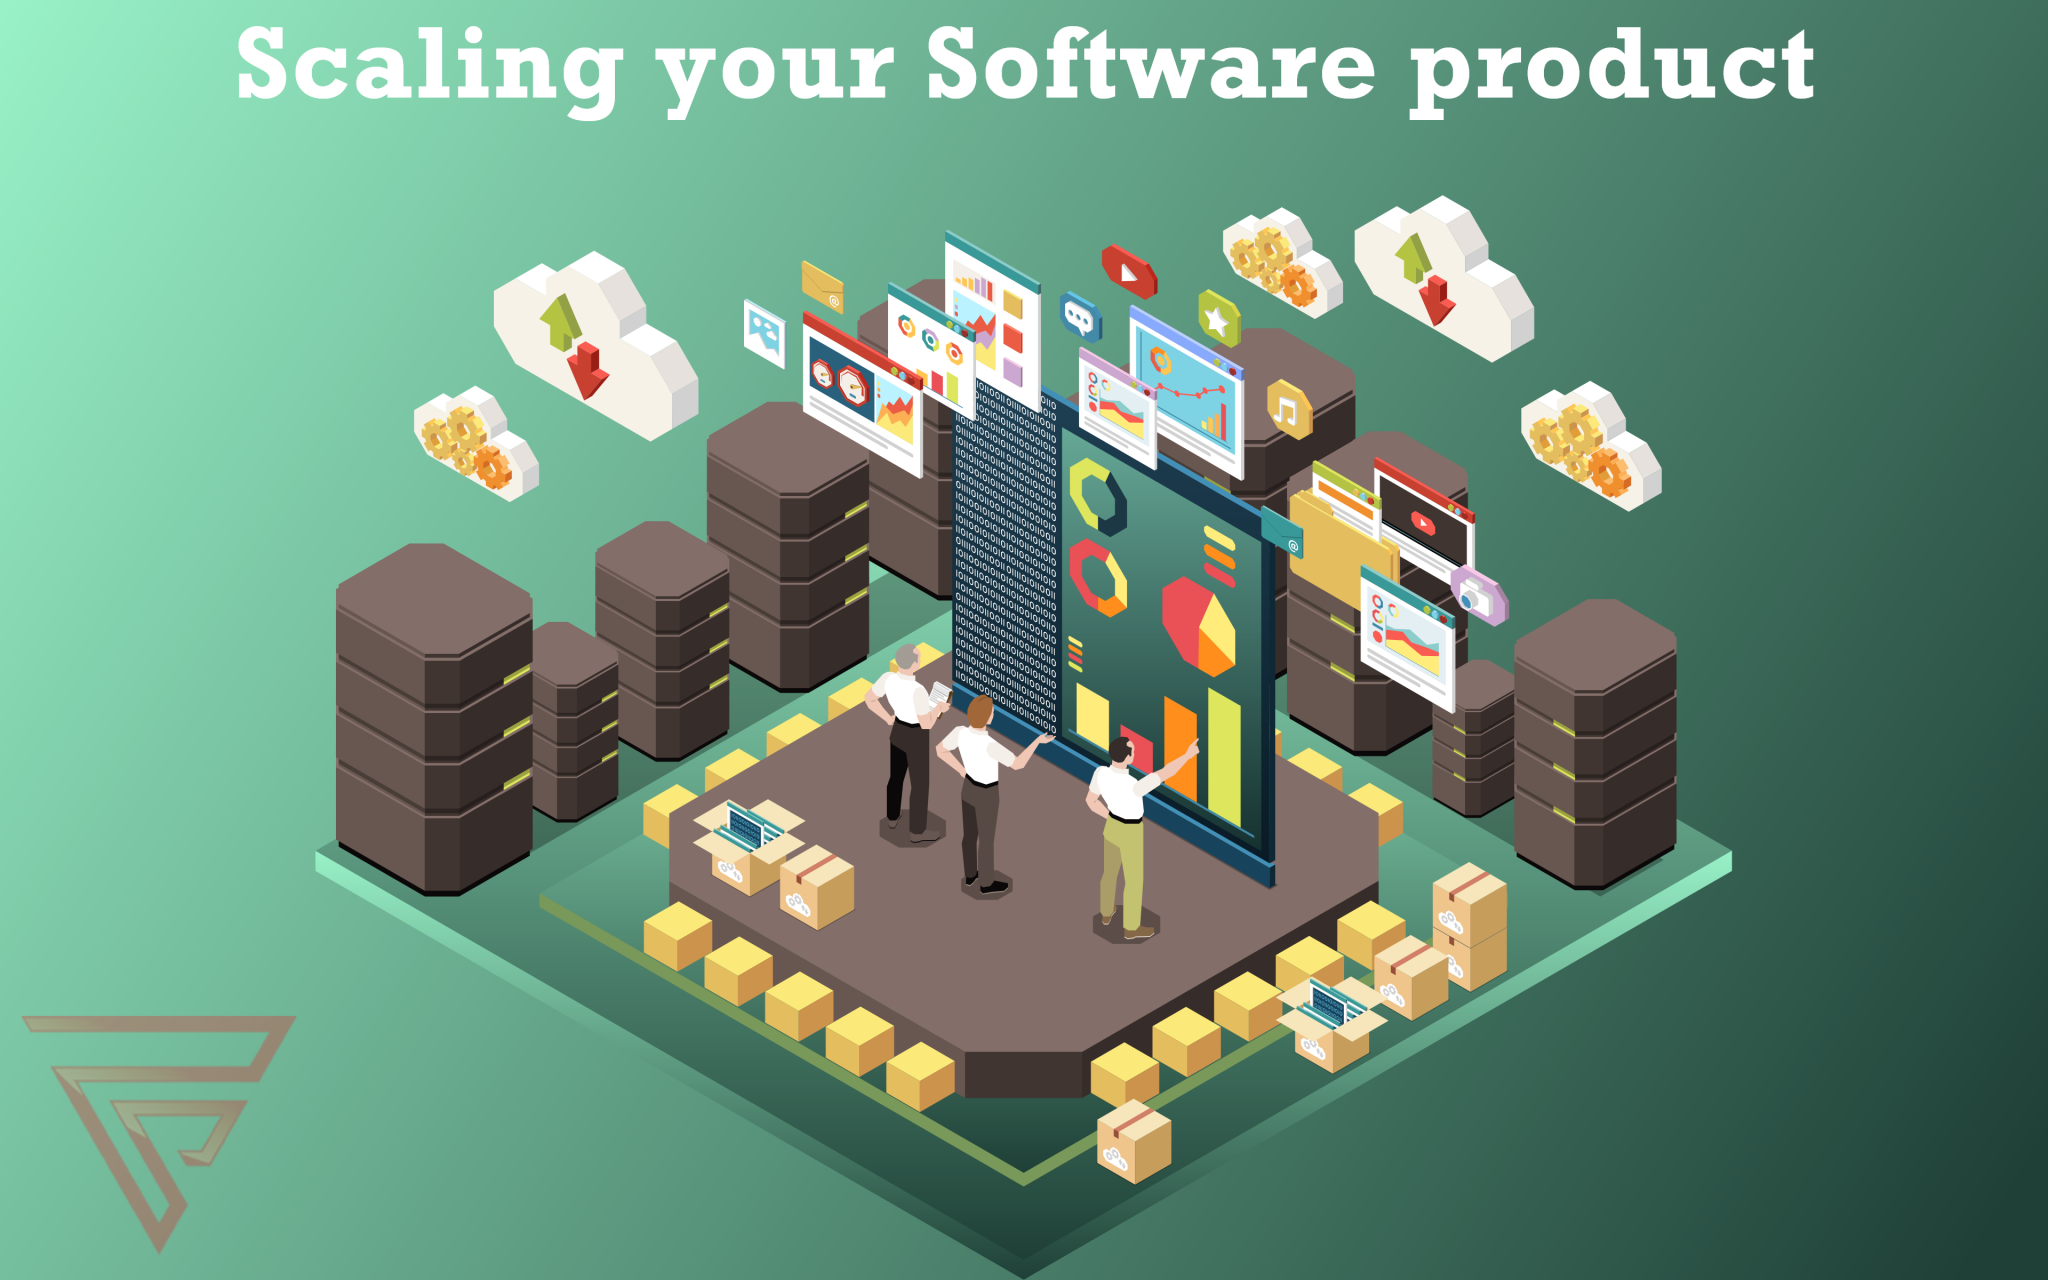 Scaling your software product